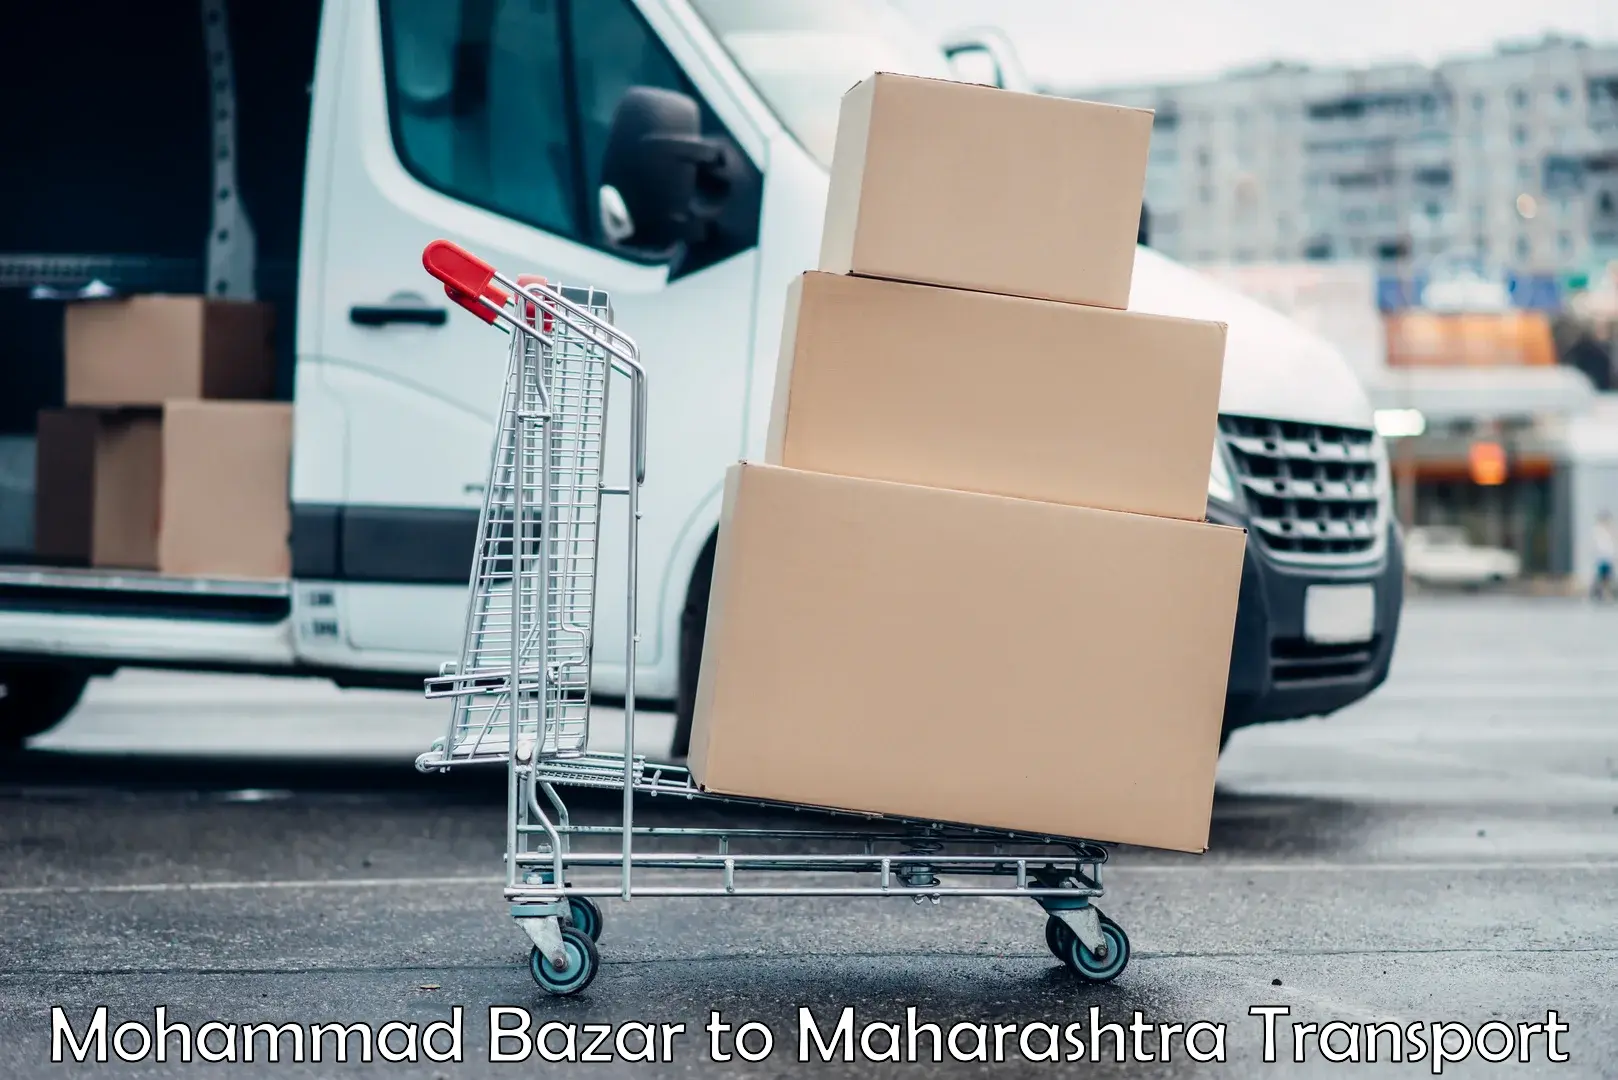 Air cargo transport services in Mohammad Bazar to Bhandara